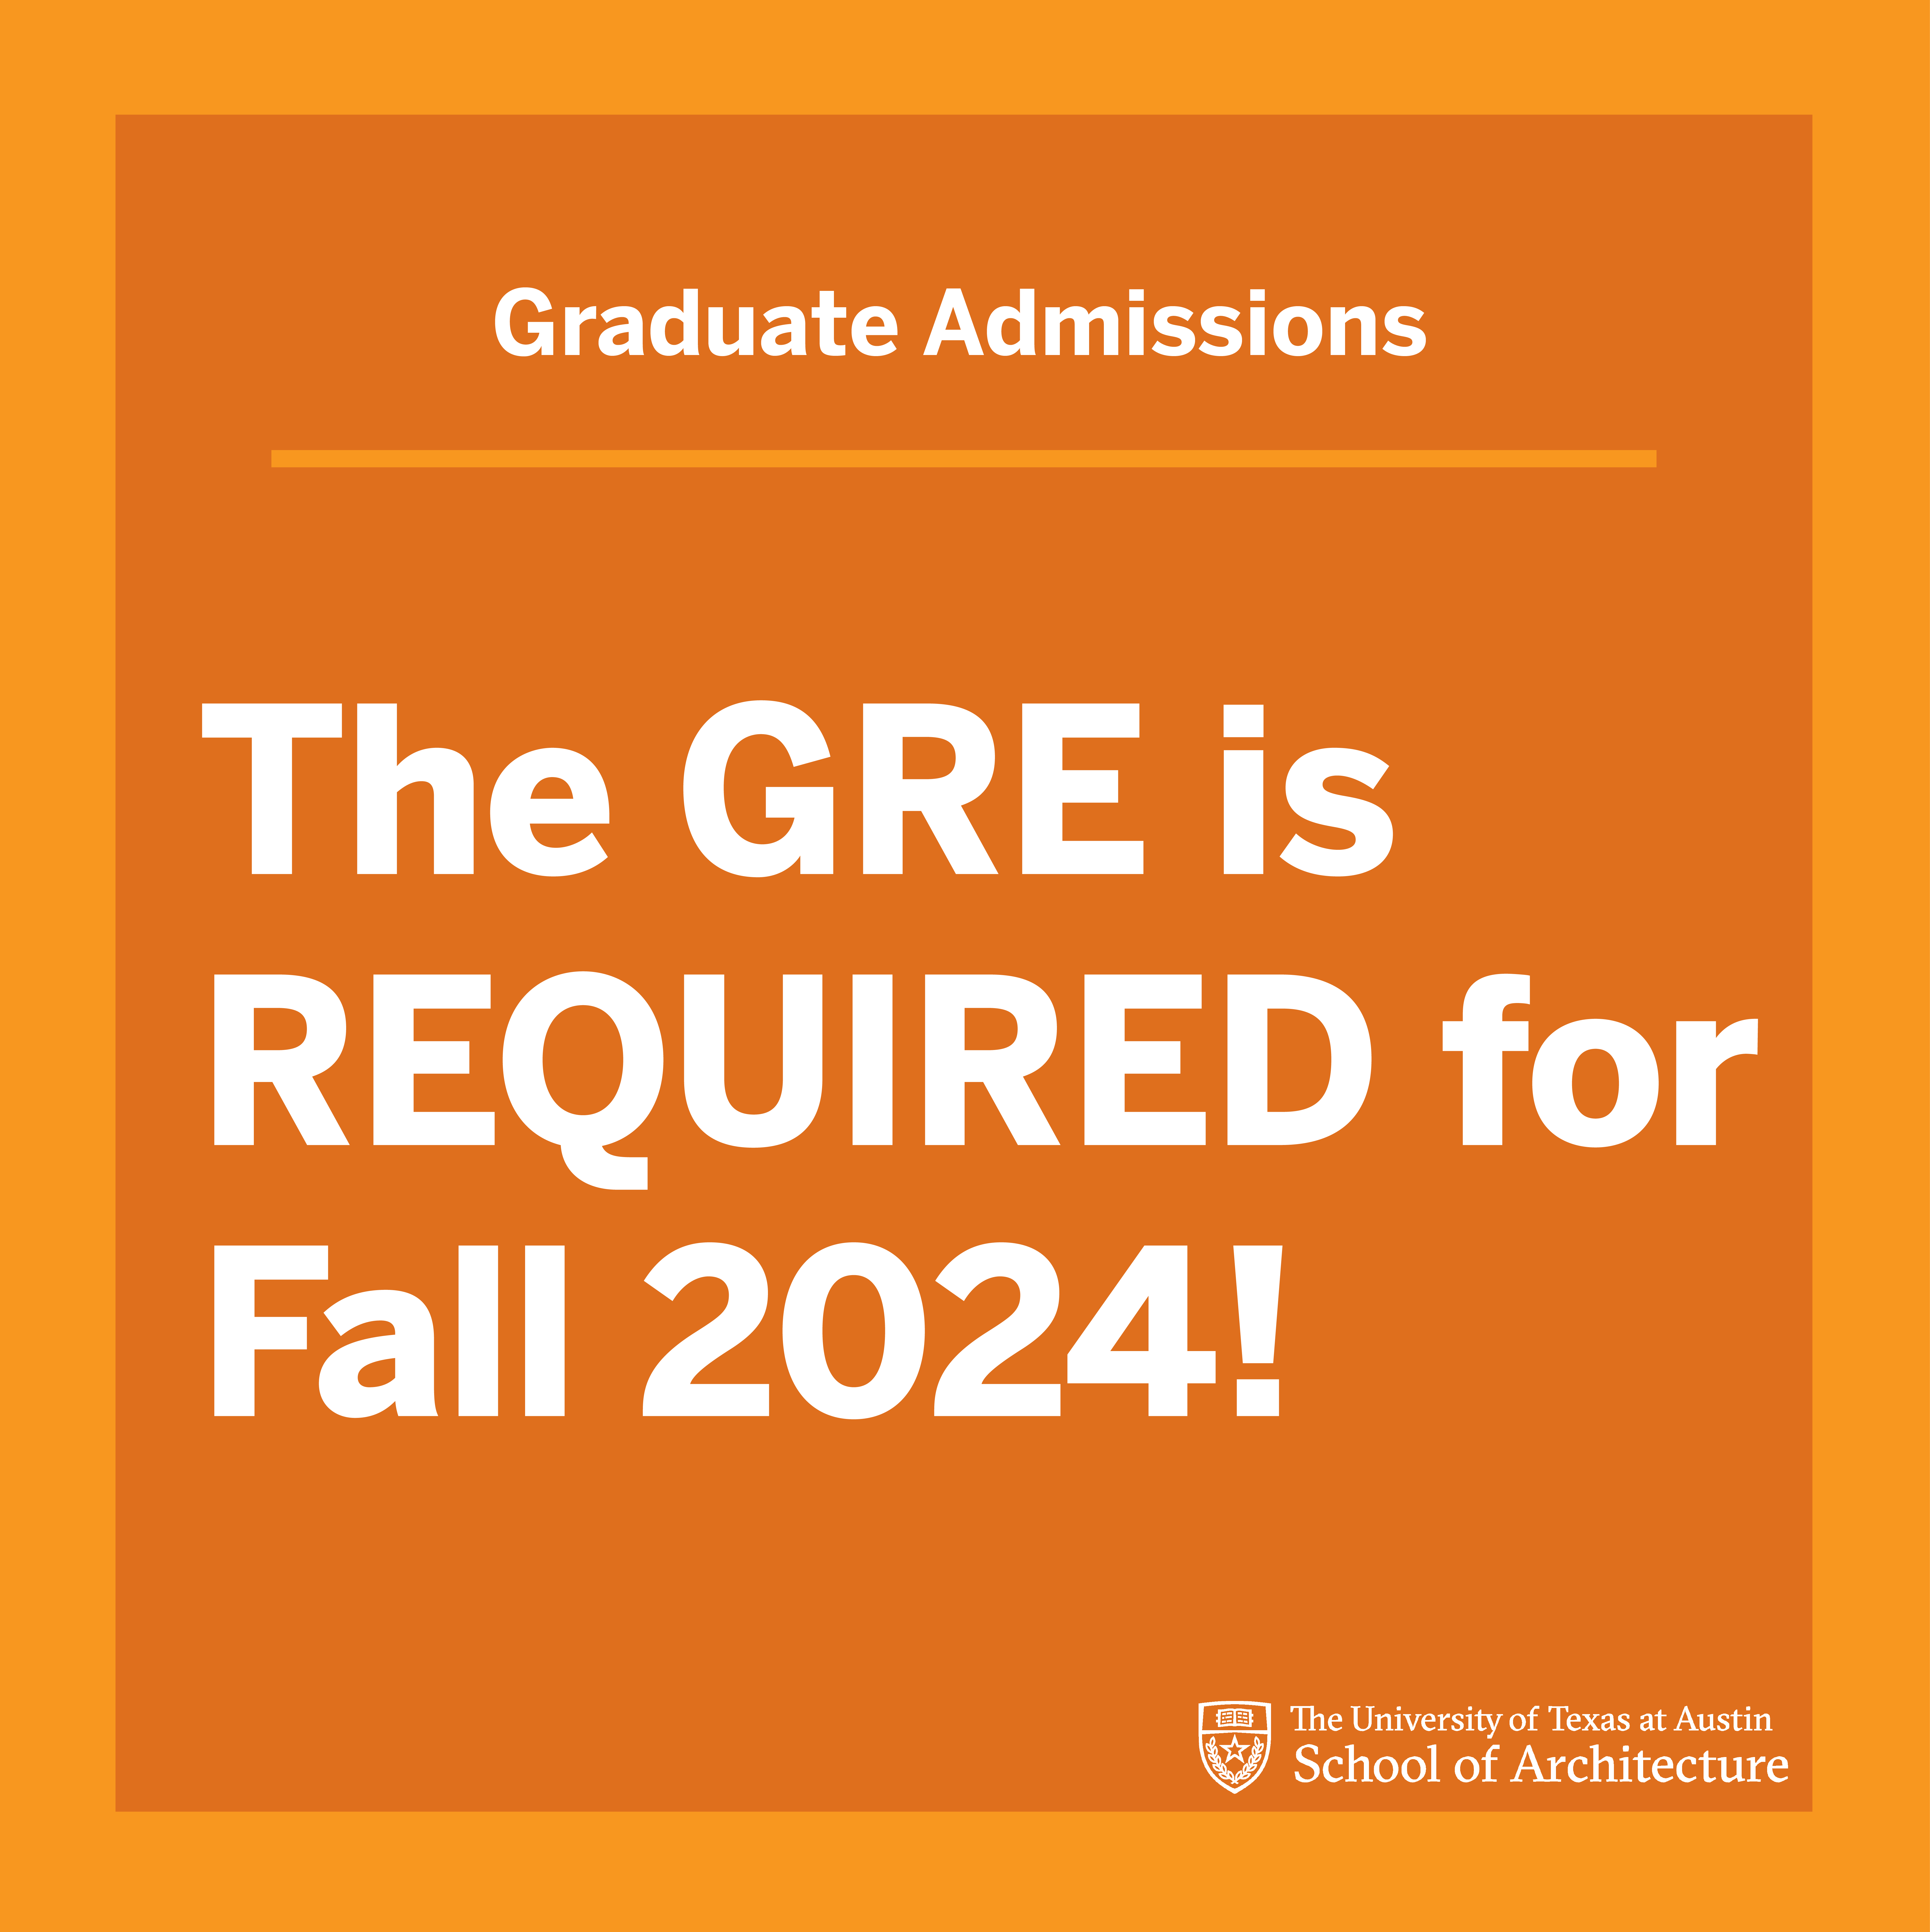 Burnt orange graphic notifying applicants that the GRE is required